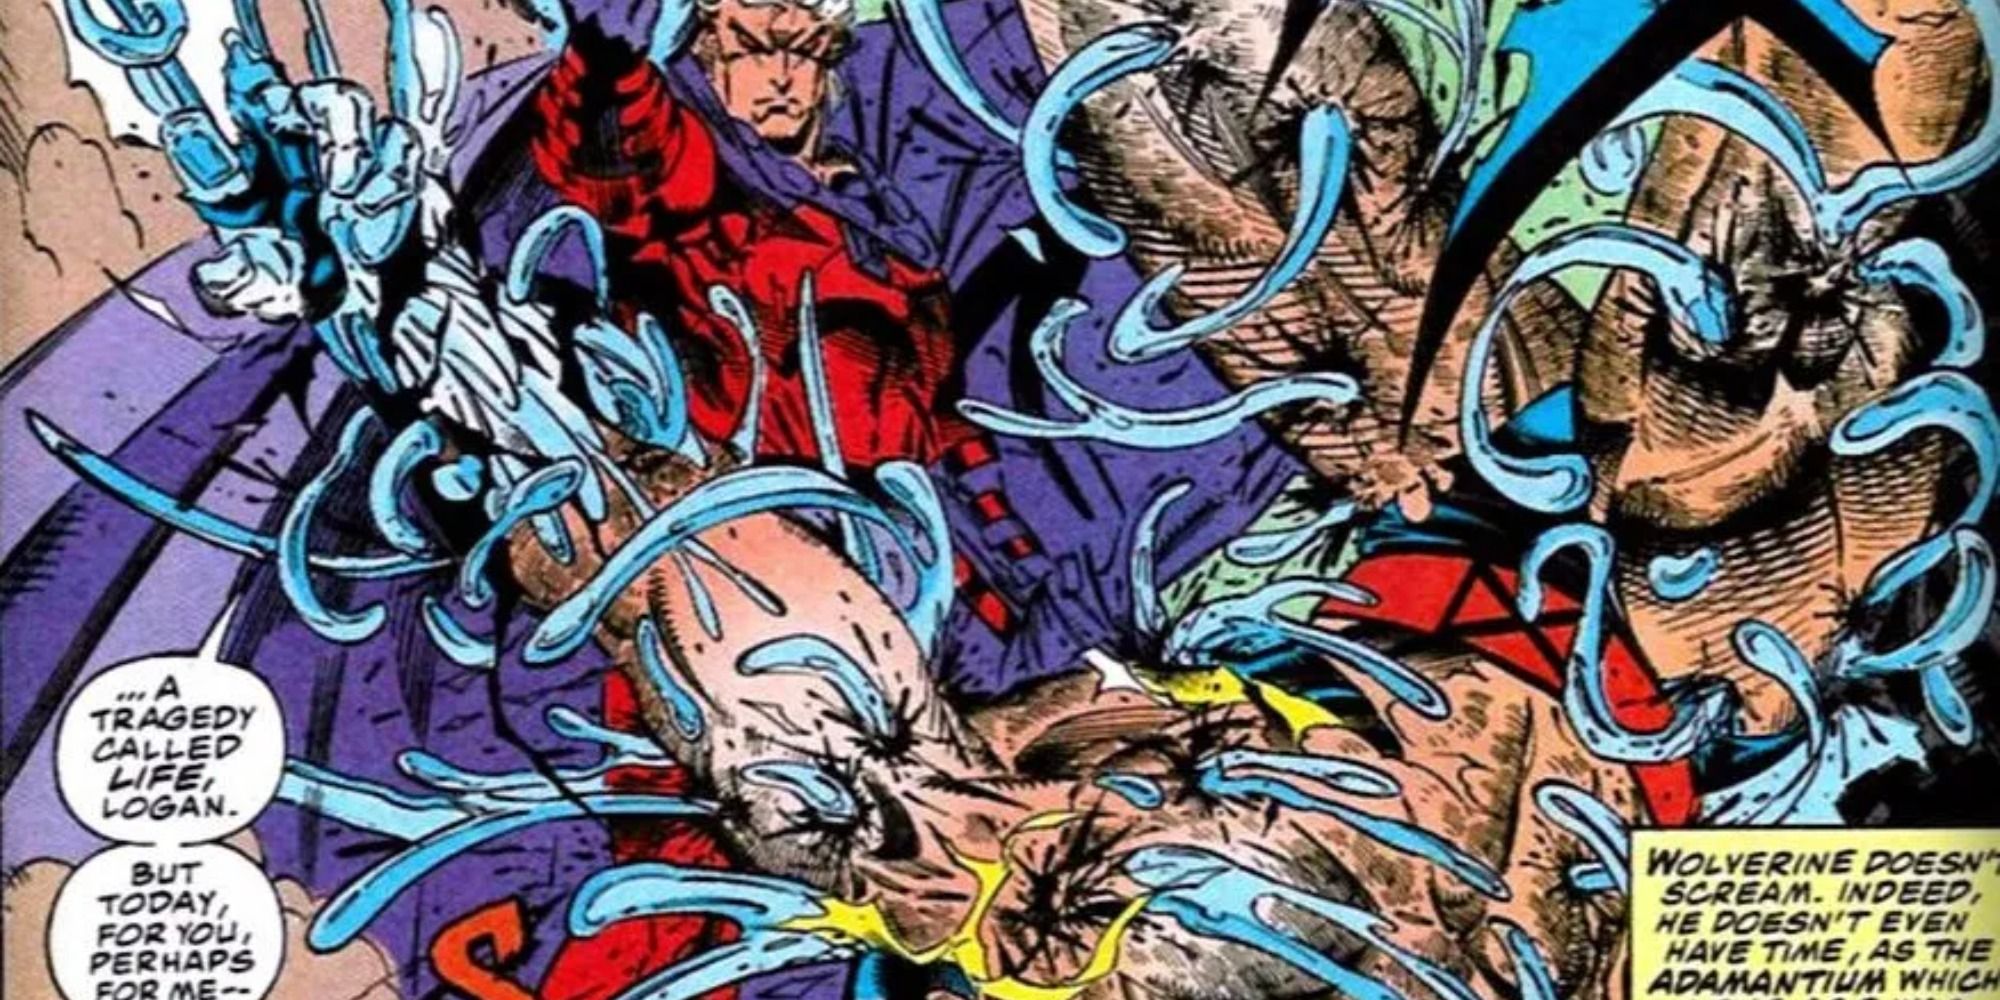 Magneto rips the adamantium out of Wolverine's body in Marvel Comics.